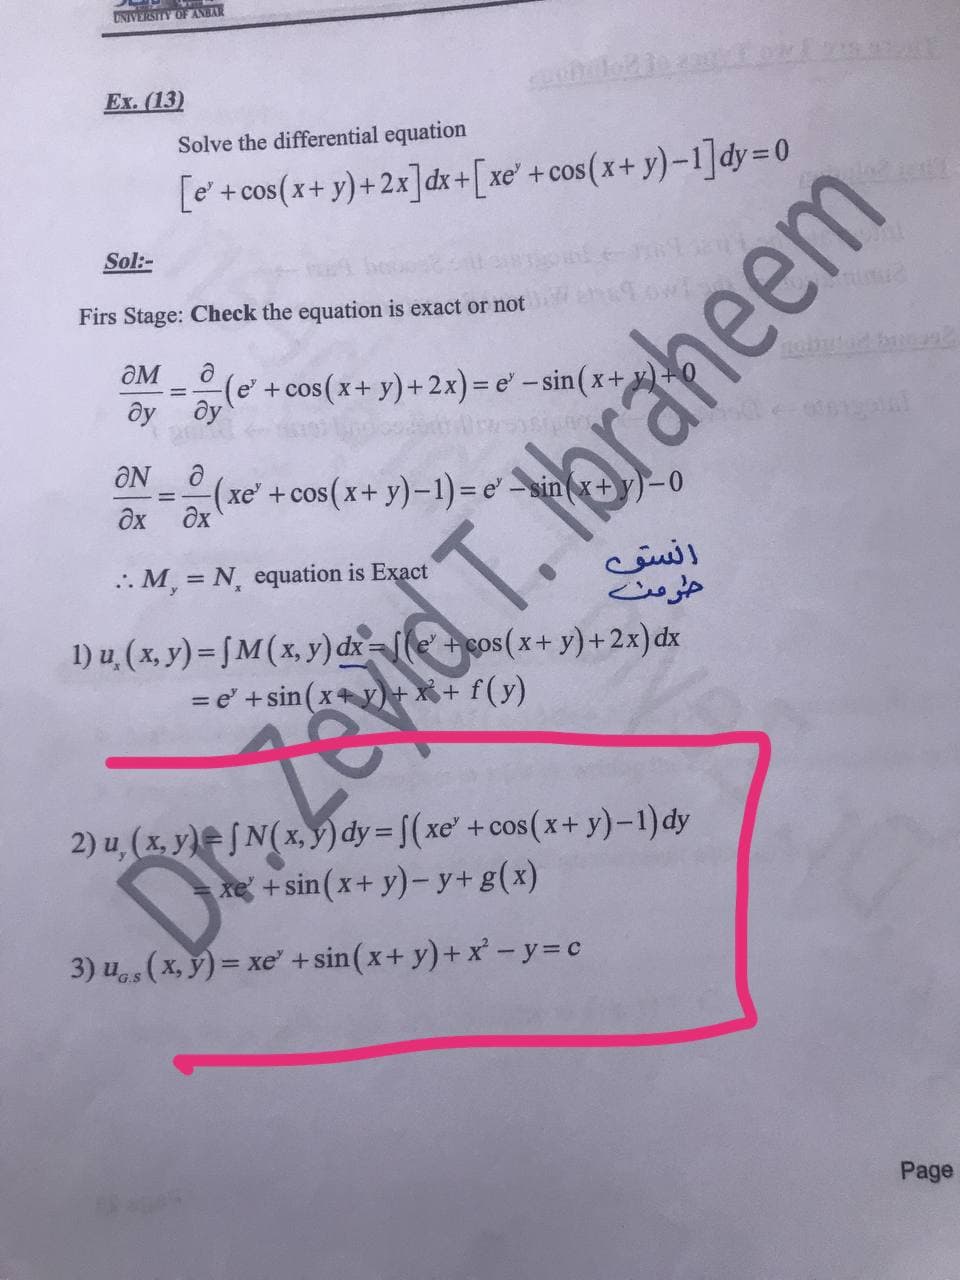 UNIVERSITY OF ANBAR
Ex. (13)
Solve the differential equation
[e + cos(x+ y)+2x]dx+[xe'+cos(x+ y)-1]dy=D0
Sol:-
Firs Stage: Check the equation is exact or not
OM
(e'+cos(x+ y)+ 2x)= e' - sin (x+
ôy ôy
ÔN
(xe' +cos(x+ y)-1) = e' sin
дх дх
انسو
حرمت
1) u, (x, y) = ƒM ( x, y) dx=[le' +cos(x+ y)+2x)dx
.. M, = N, equation is Exact
2) u, (x. y)= JN( x, §) dy = f(xe' +cos(x+ y)-1)dy
re + sin(x+ y)- y+ g(x)
3) u (x, ý) = xe" +sin(x+ y)+x -y=c
G.S
Page
Zevid T. Hbraheem
